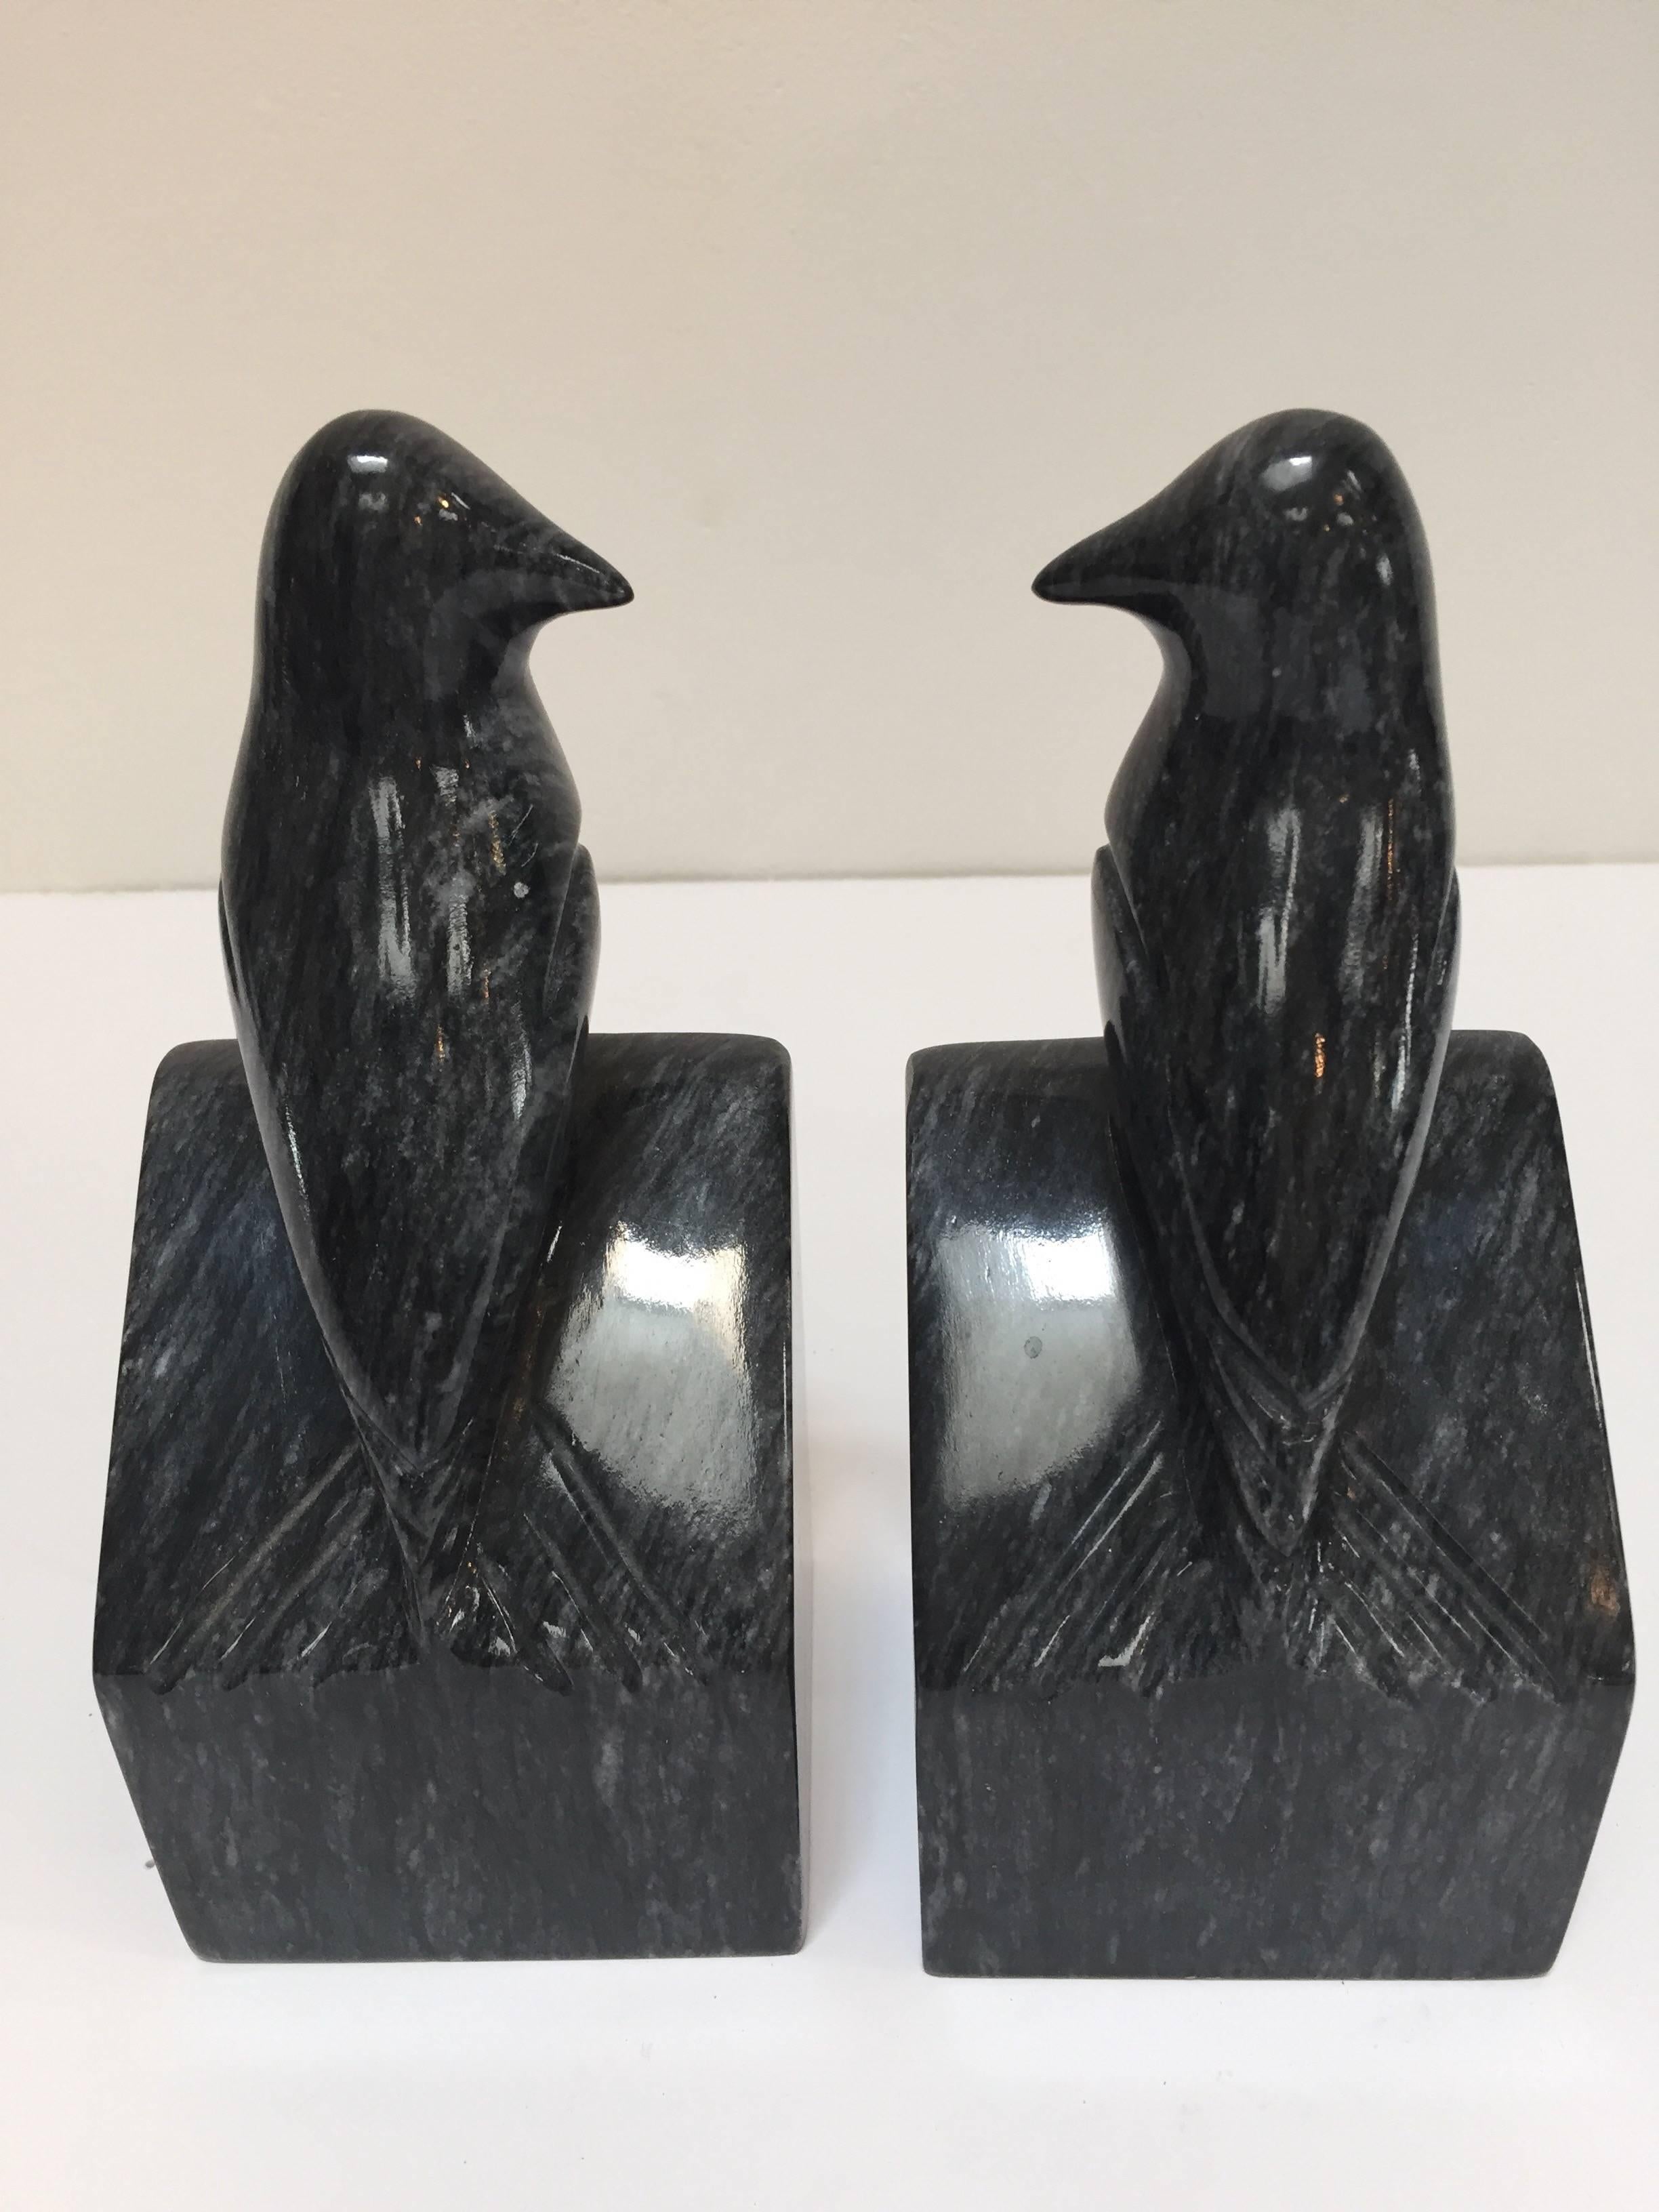 Pair of Modernist Art Deco Black Marble Birds Bookends 2